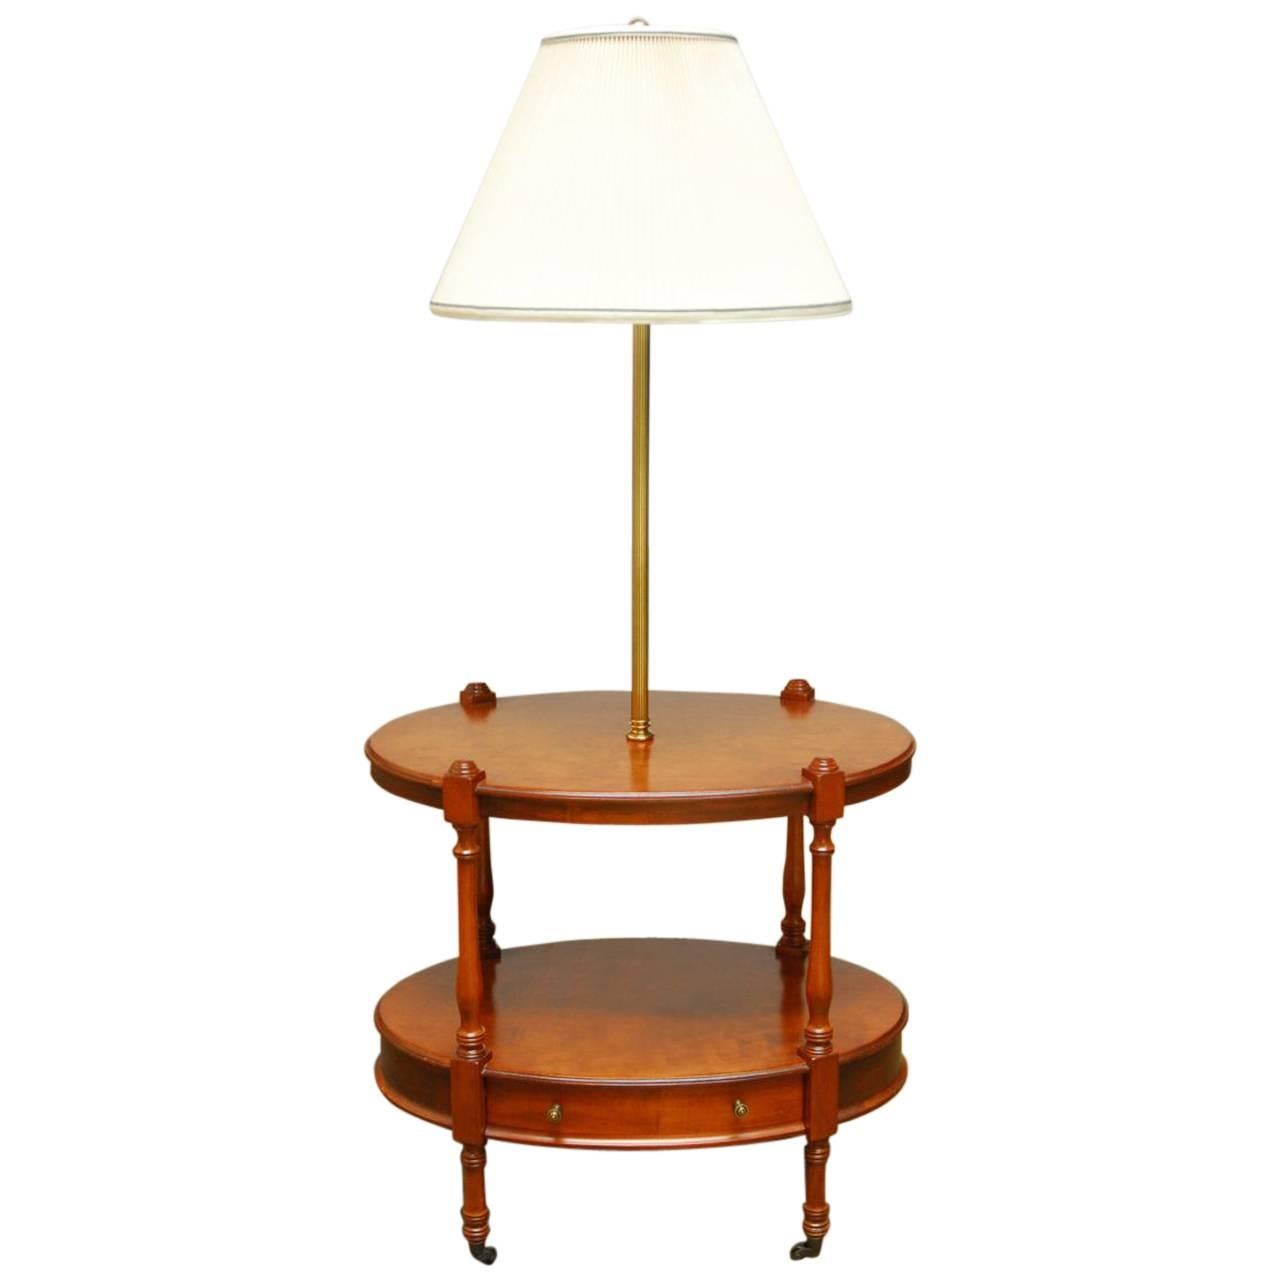 Two-Tier Oval Side Table with Brass Lamp by Frederick Cooper